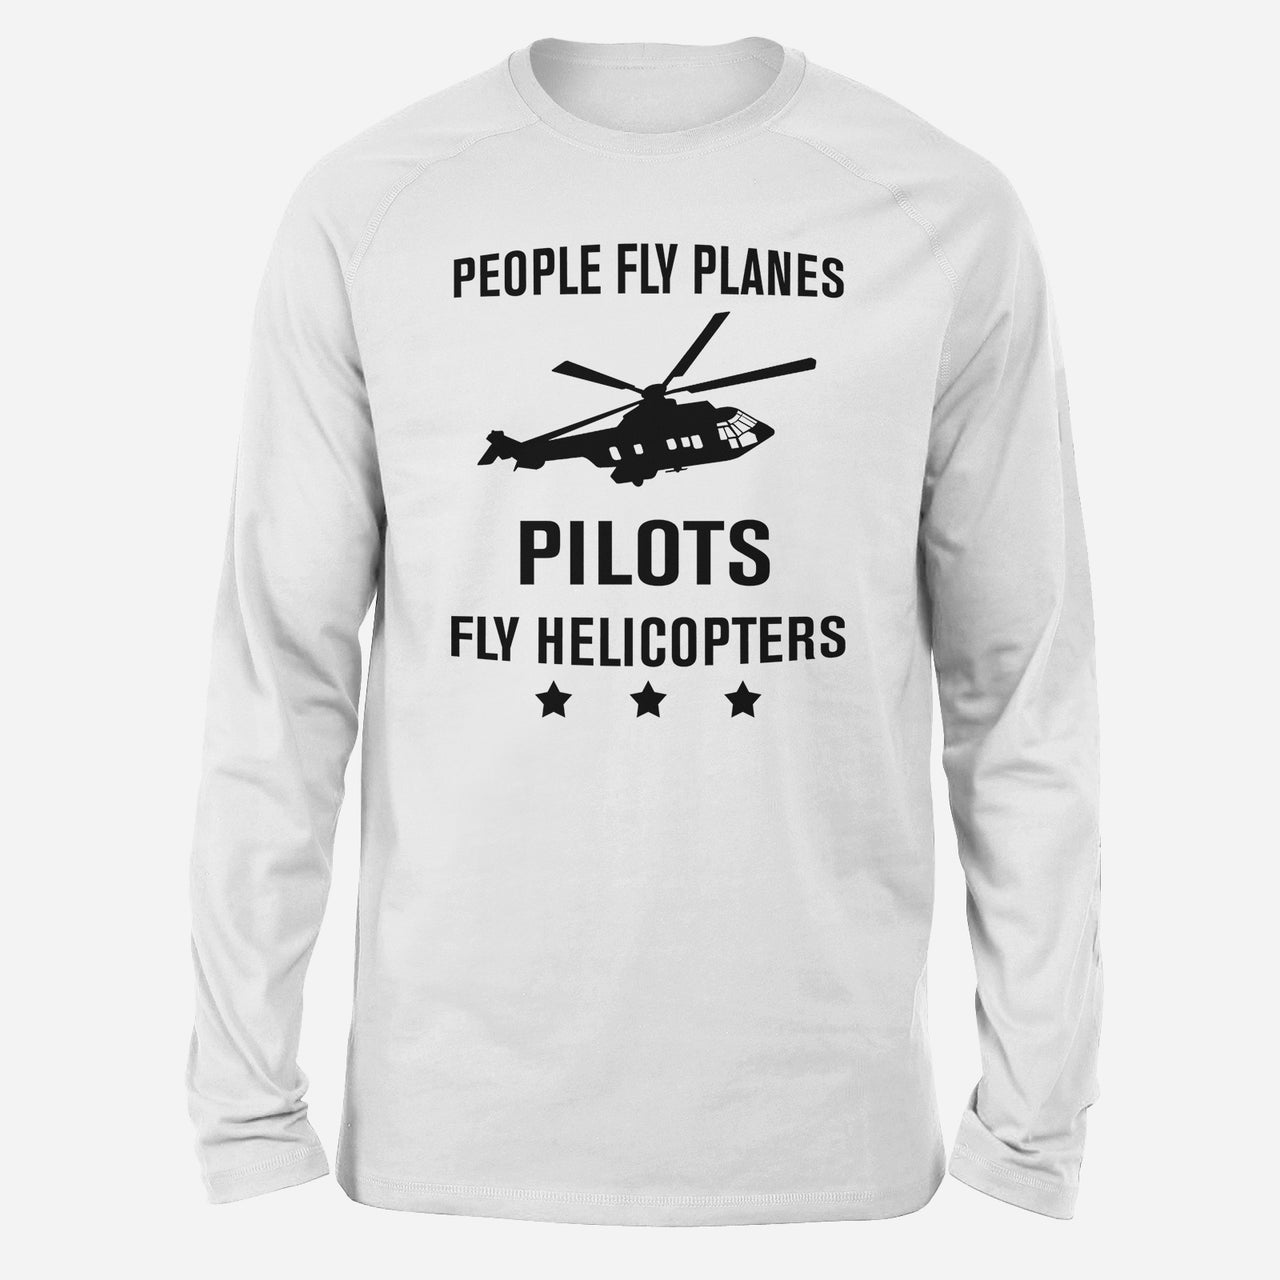 People Fly Planes Pilots Fly Helicopters Designed Long-Sleeve T-Shirts